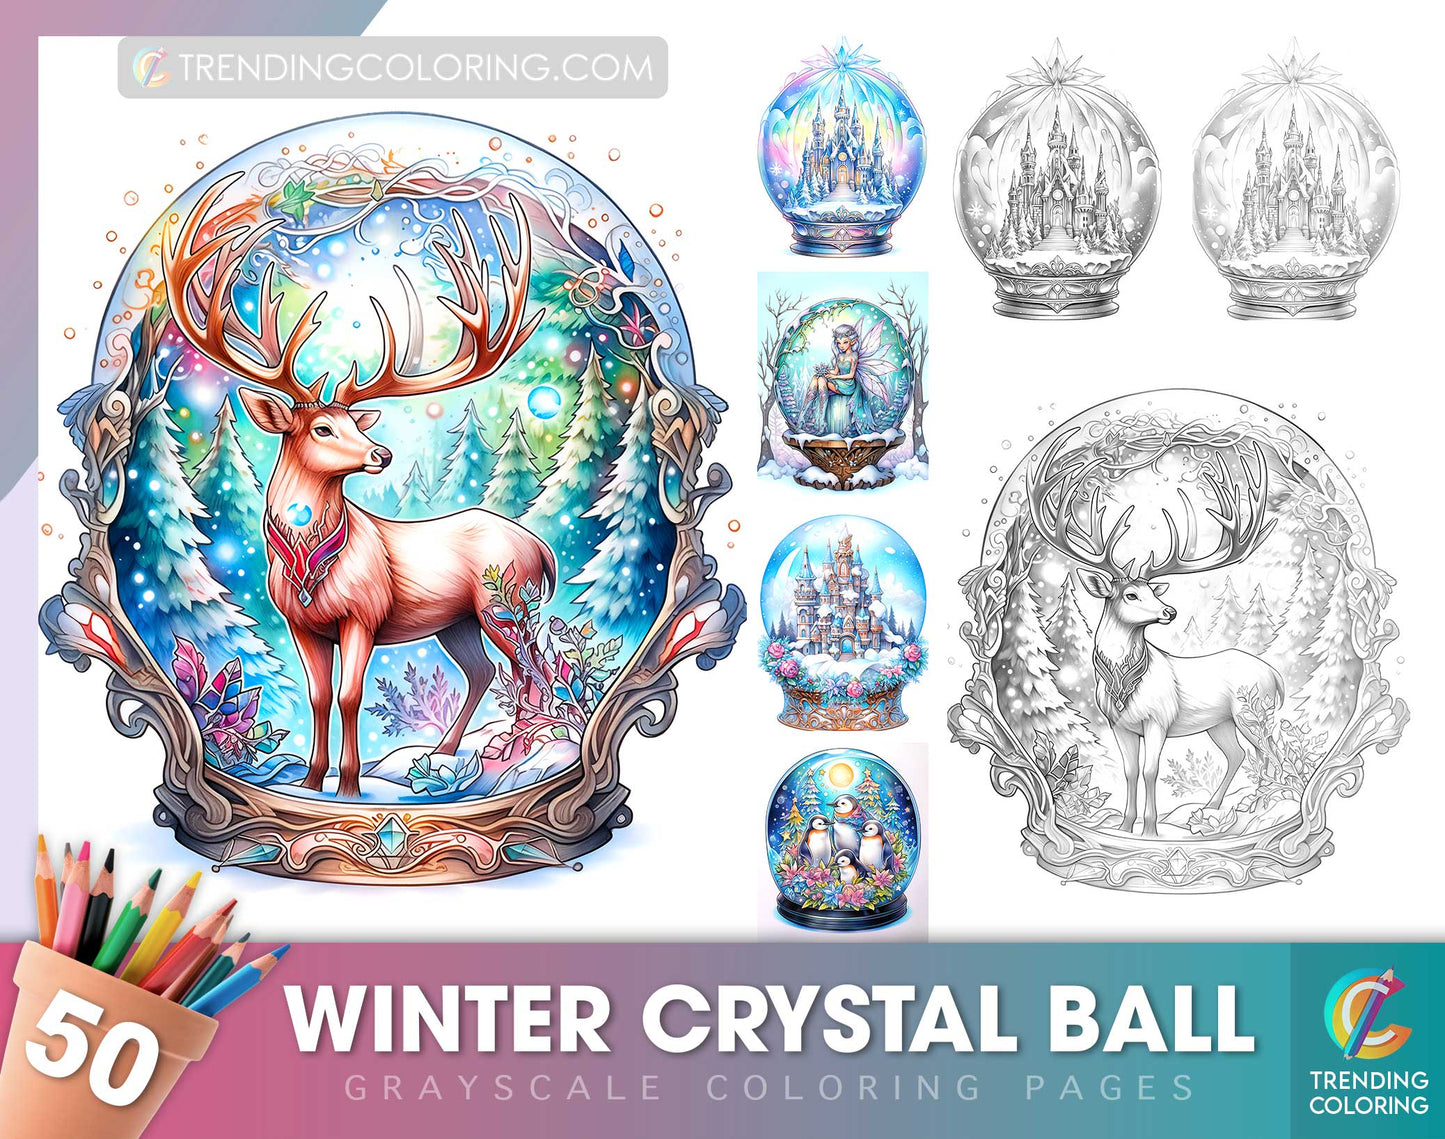 50 Winter Crystal Ball Grayscale Coloring Pages - Instant Download - Printable Dark/Light